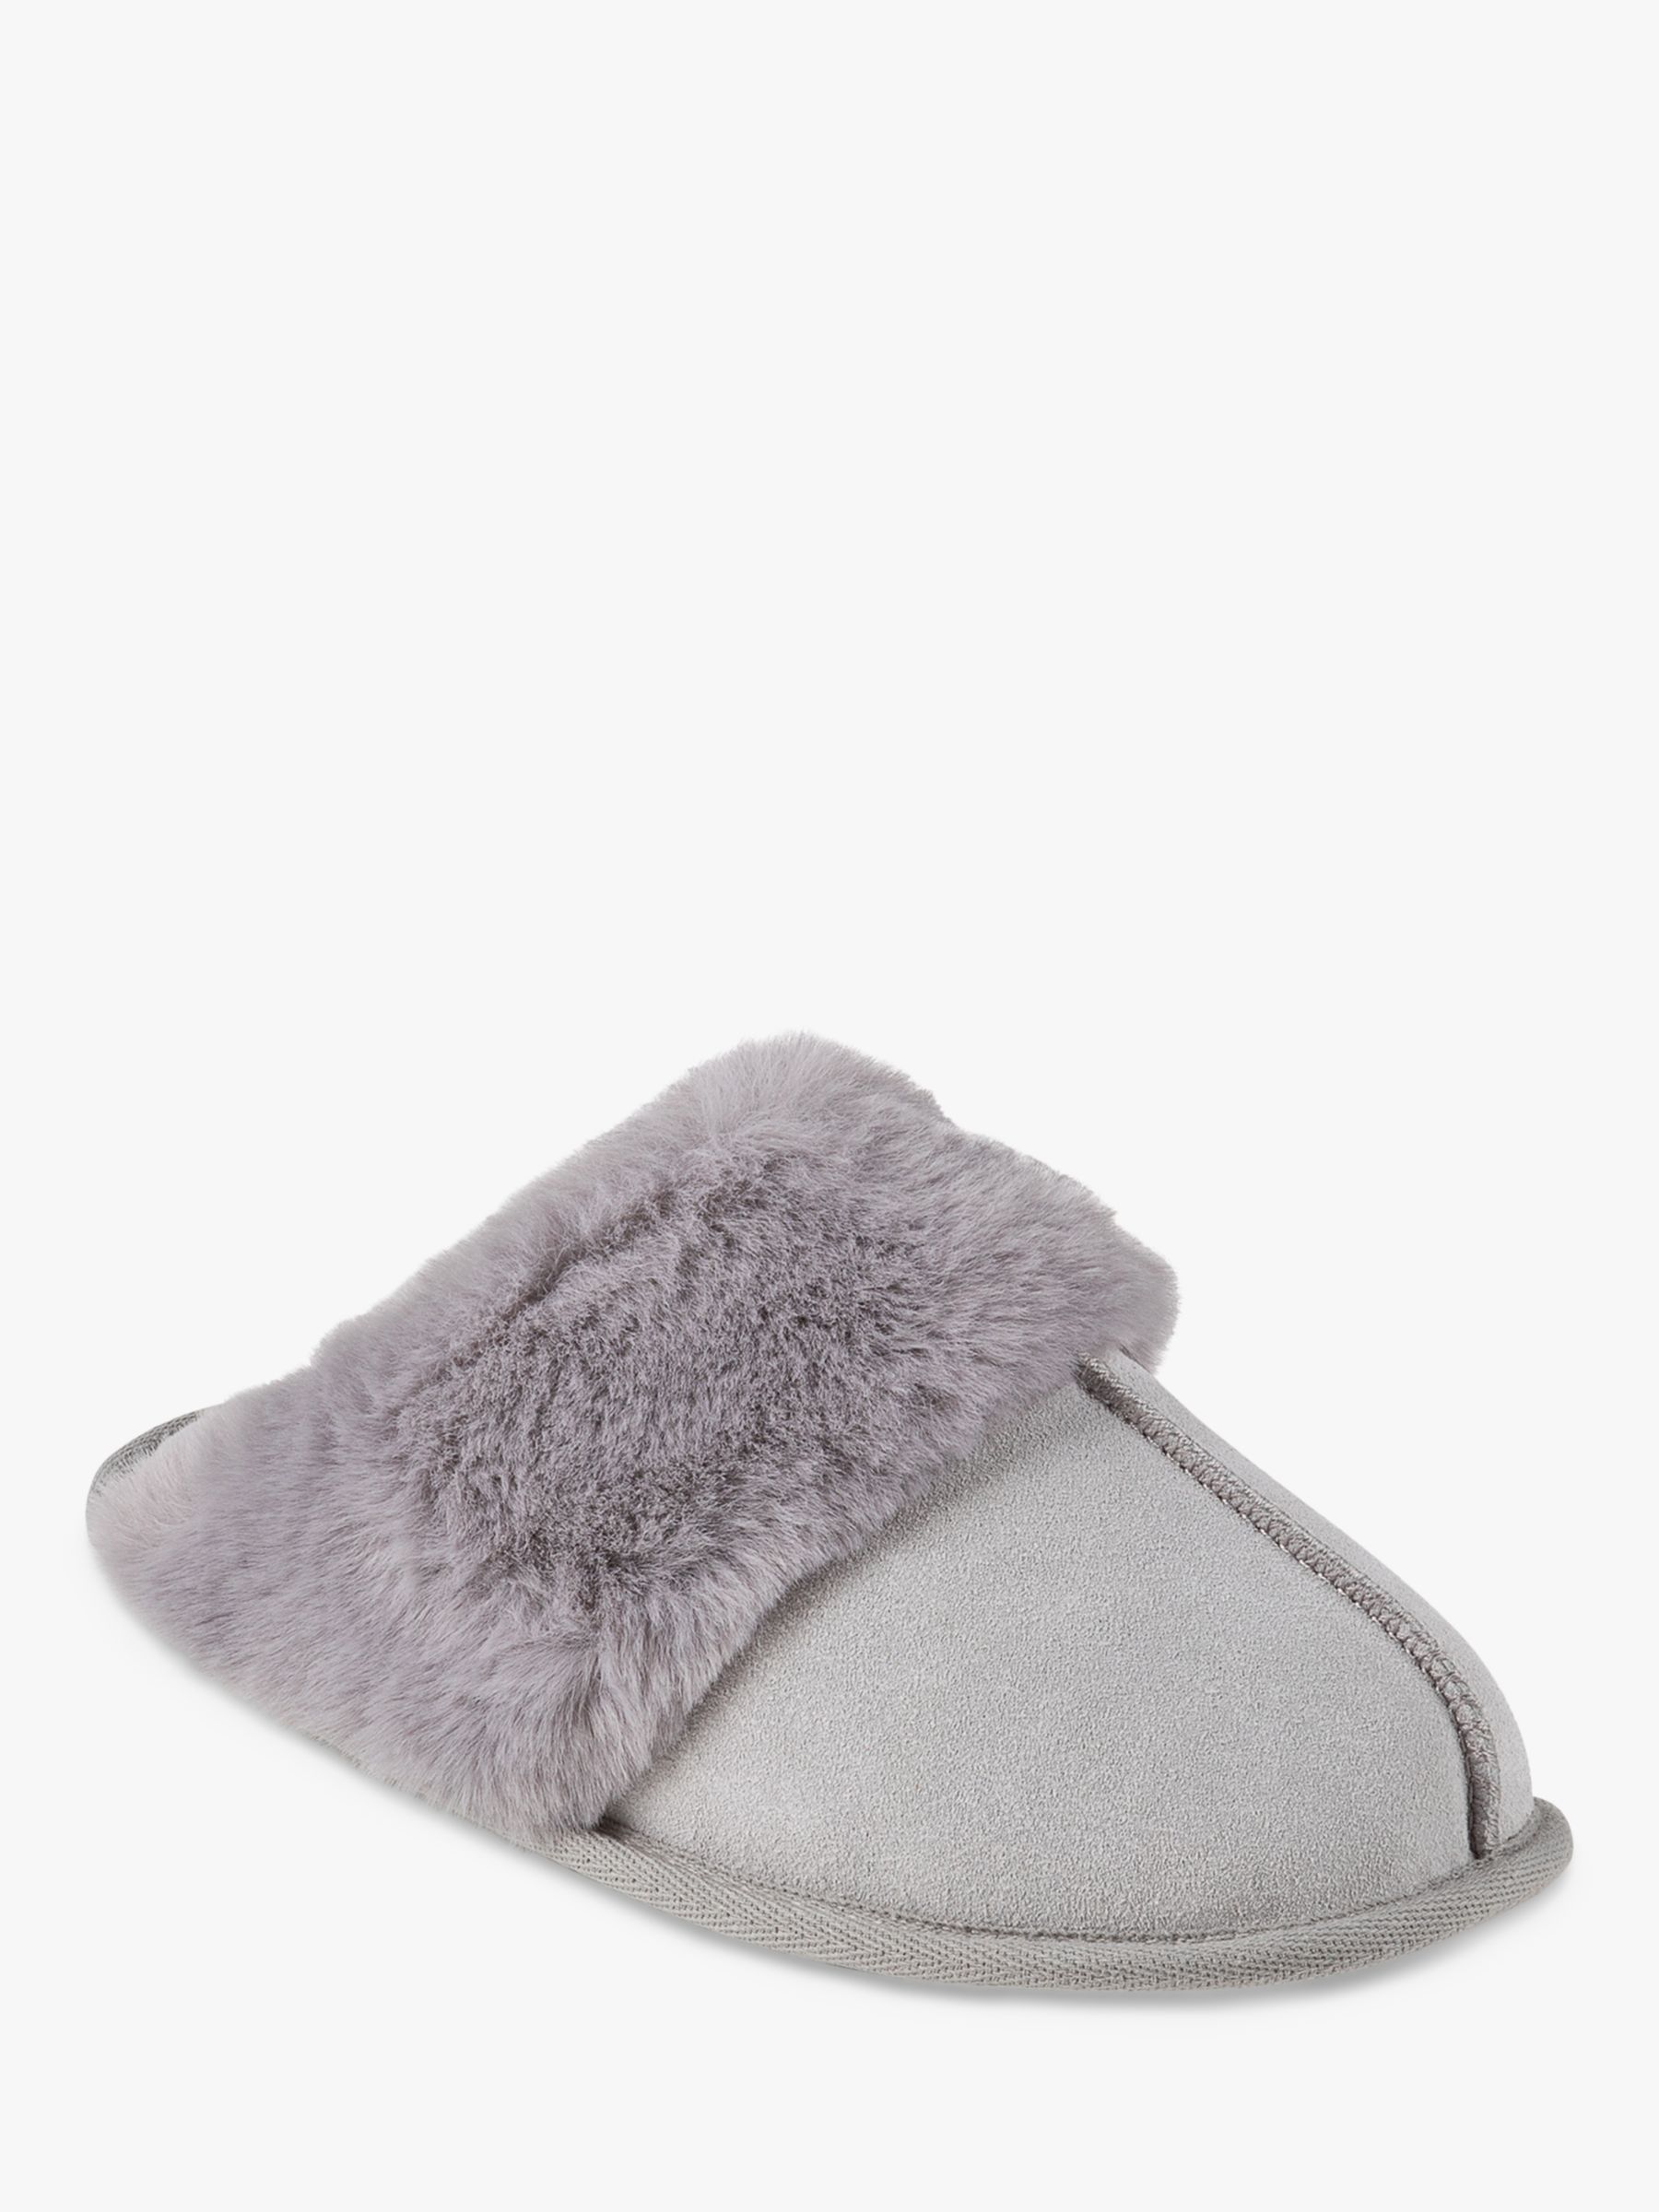 totes Real Suede with Fur Cuff Slippers, Grey at John Lewis & Partners